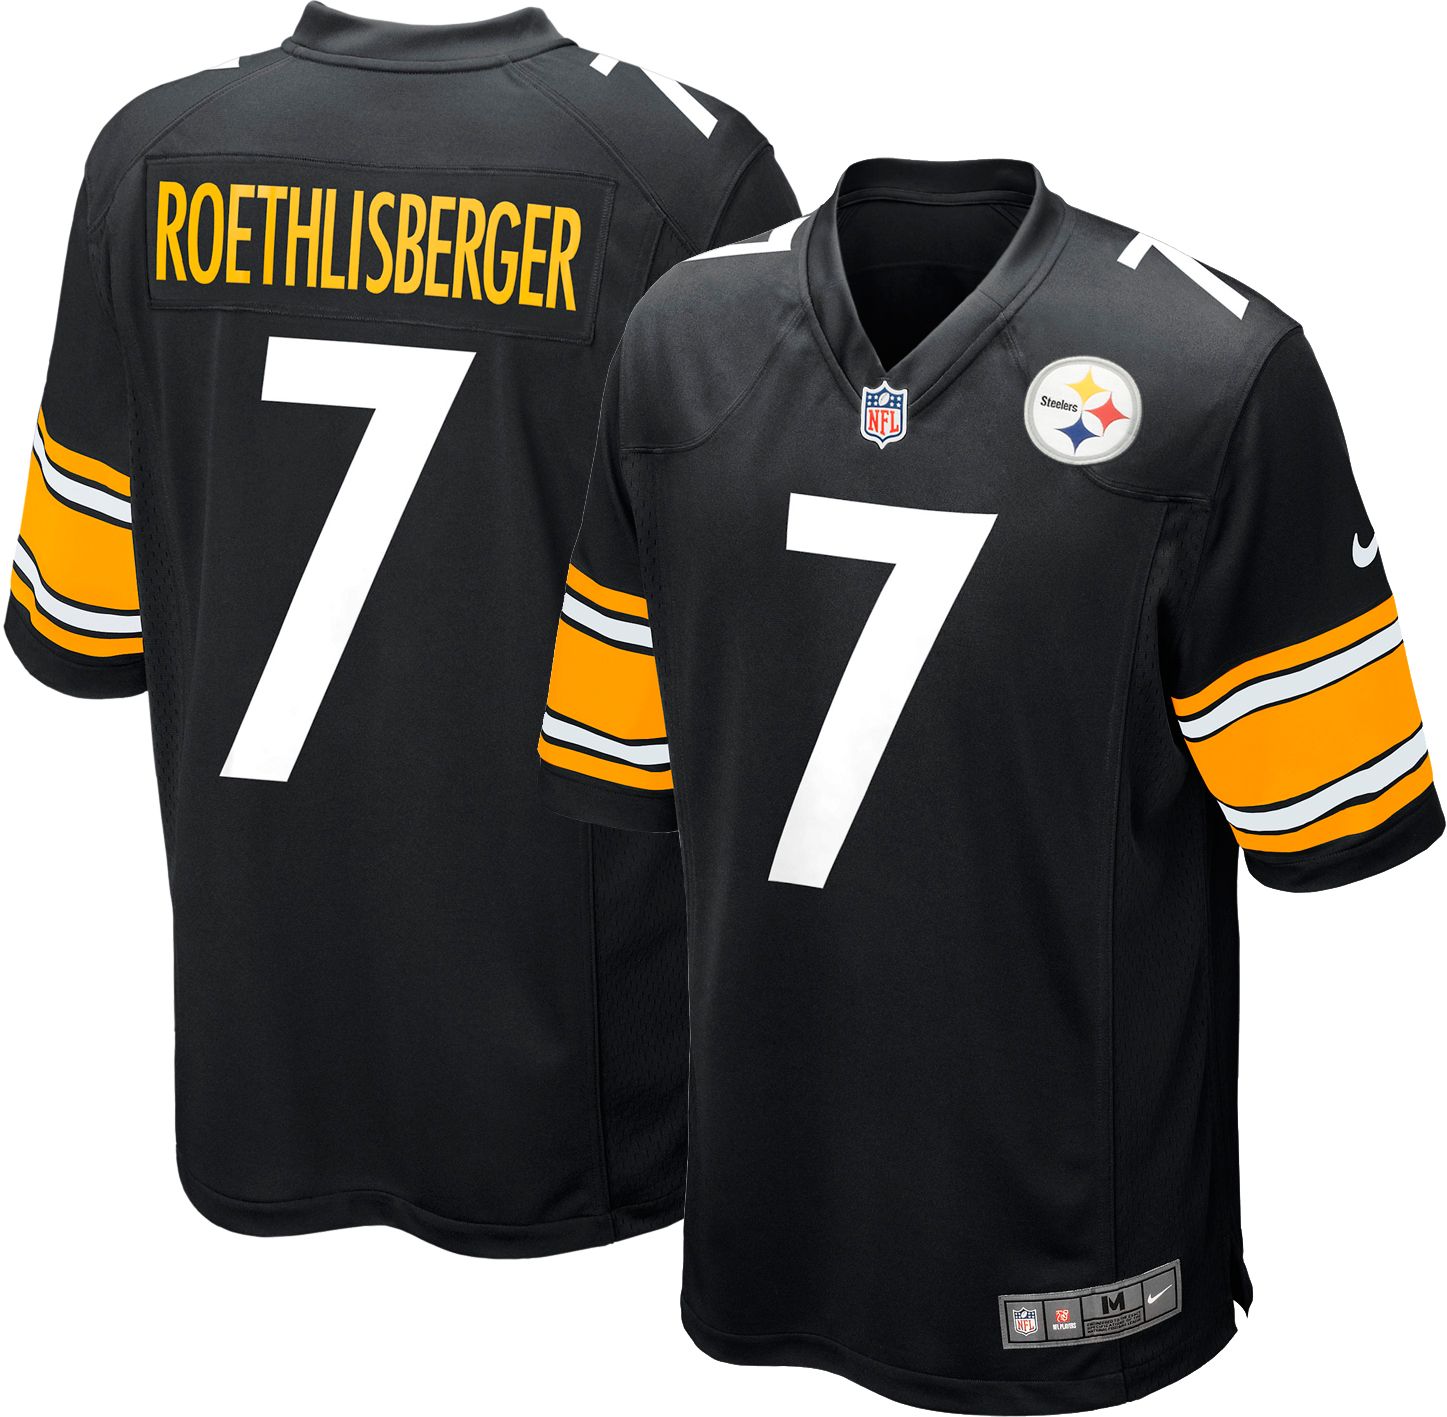 Nike Youth Home Game Jersey Pittsburgh 